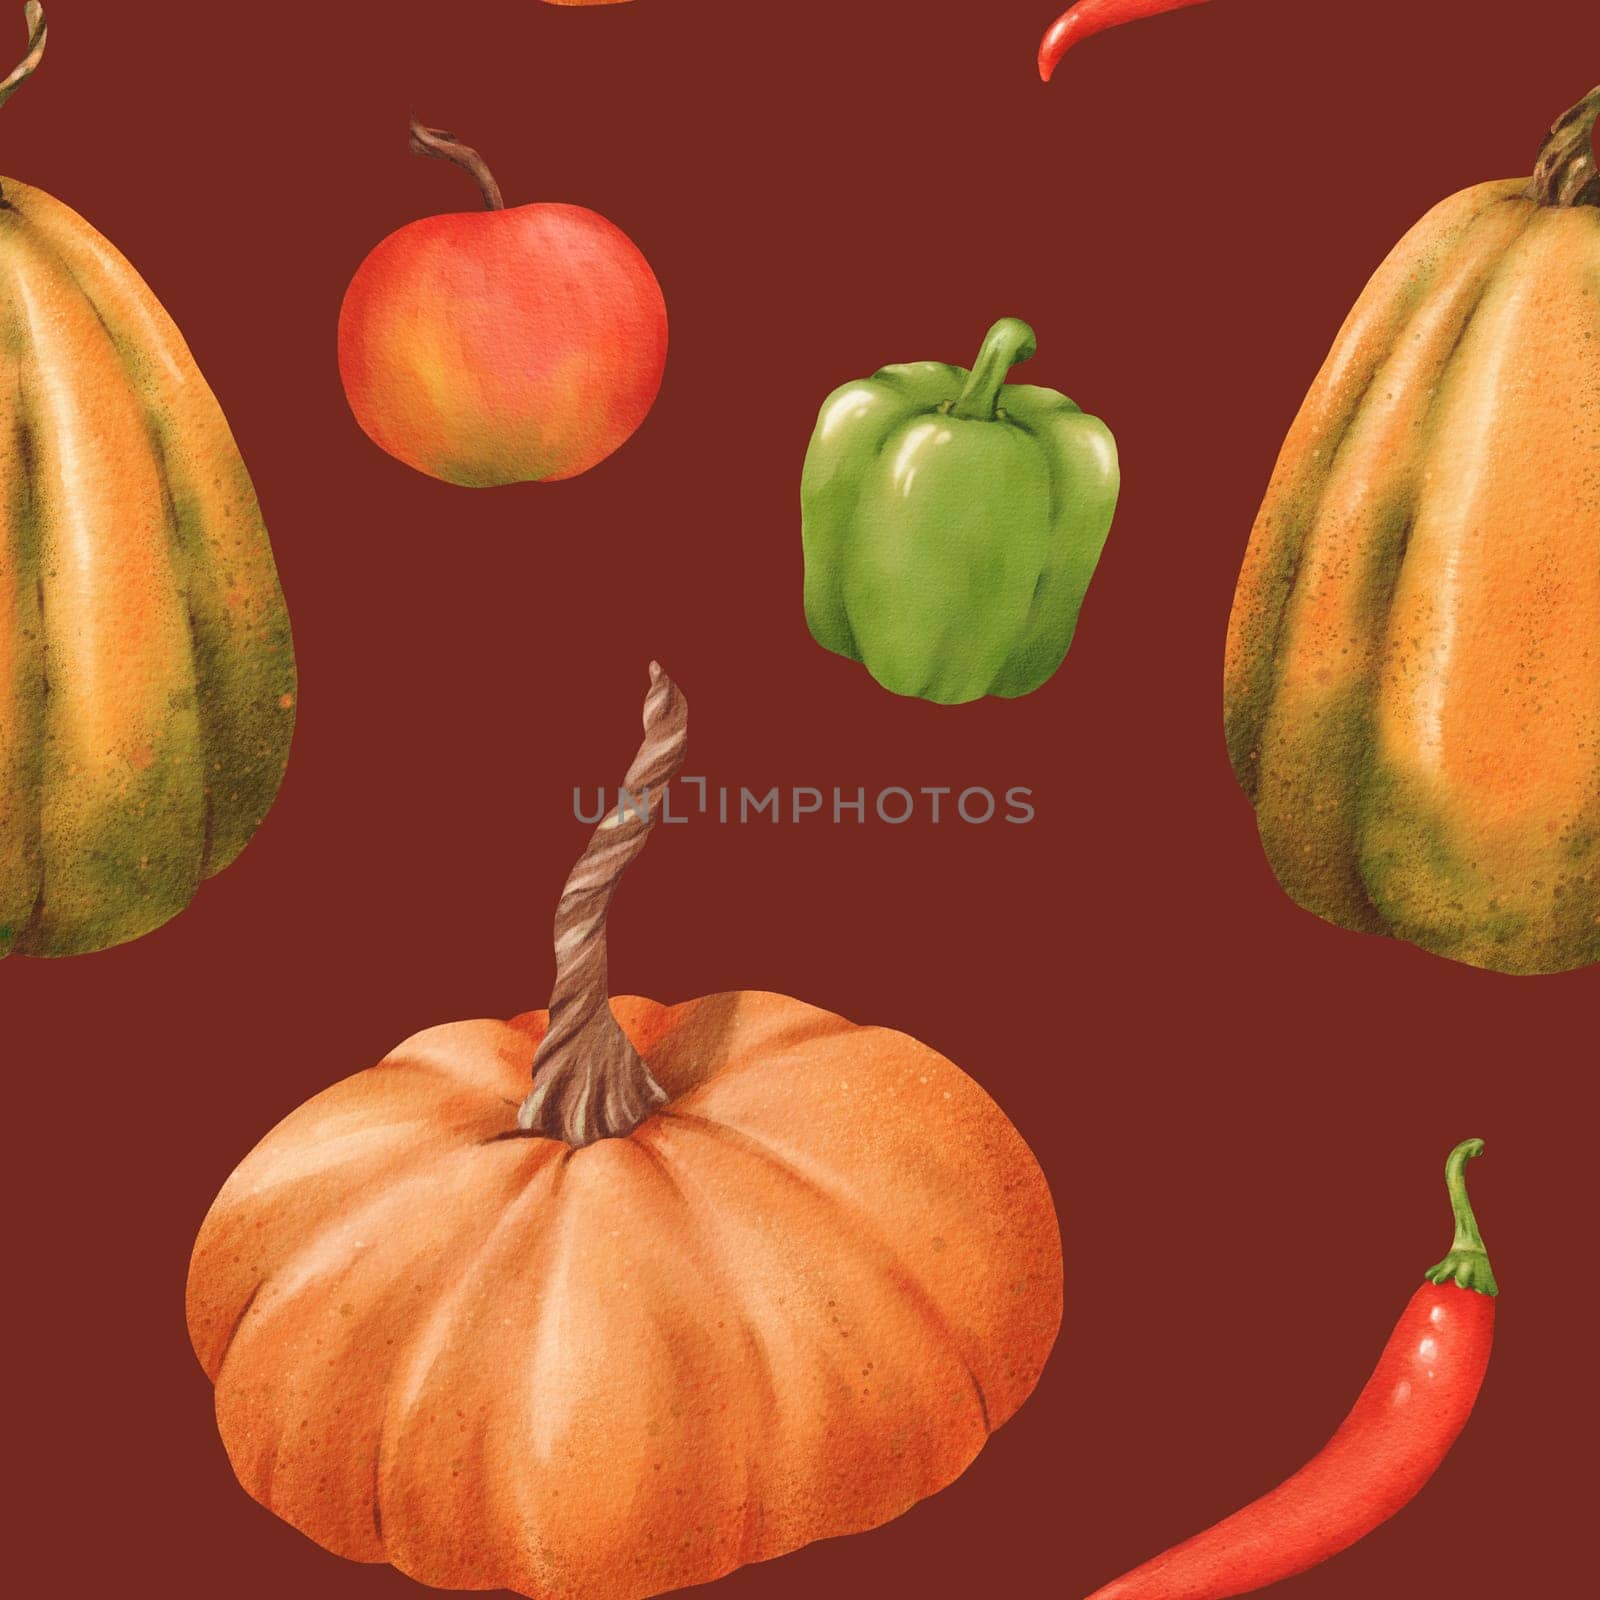 Seamless pattern of Pumpkins apples pepper paprika, chili. Watercolor illustration. Autumn harvest. Delicious ripe vegetable. Vegetarian raw food. For posters, websites, notebooks, textbooks.